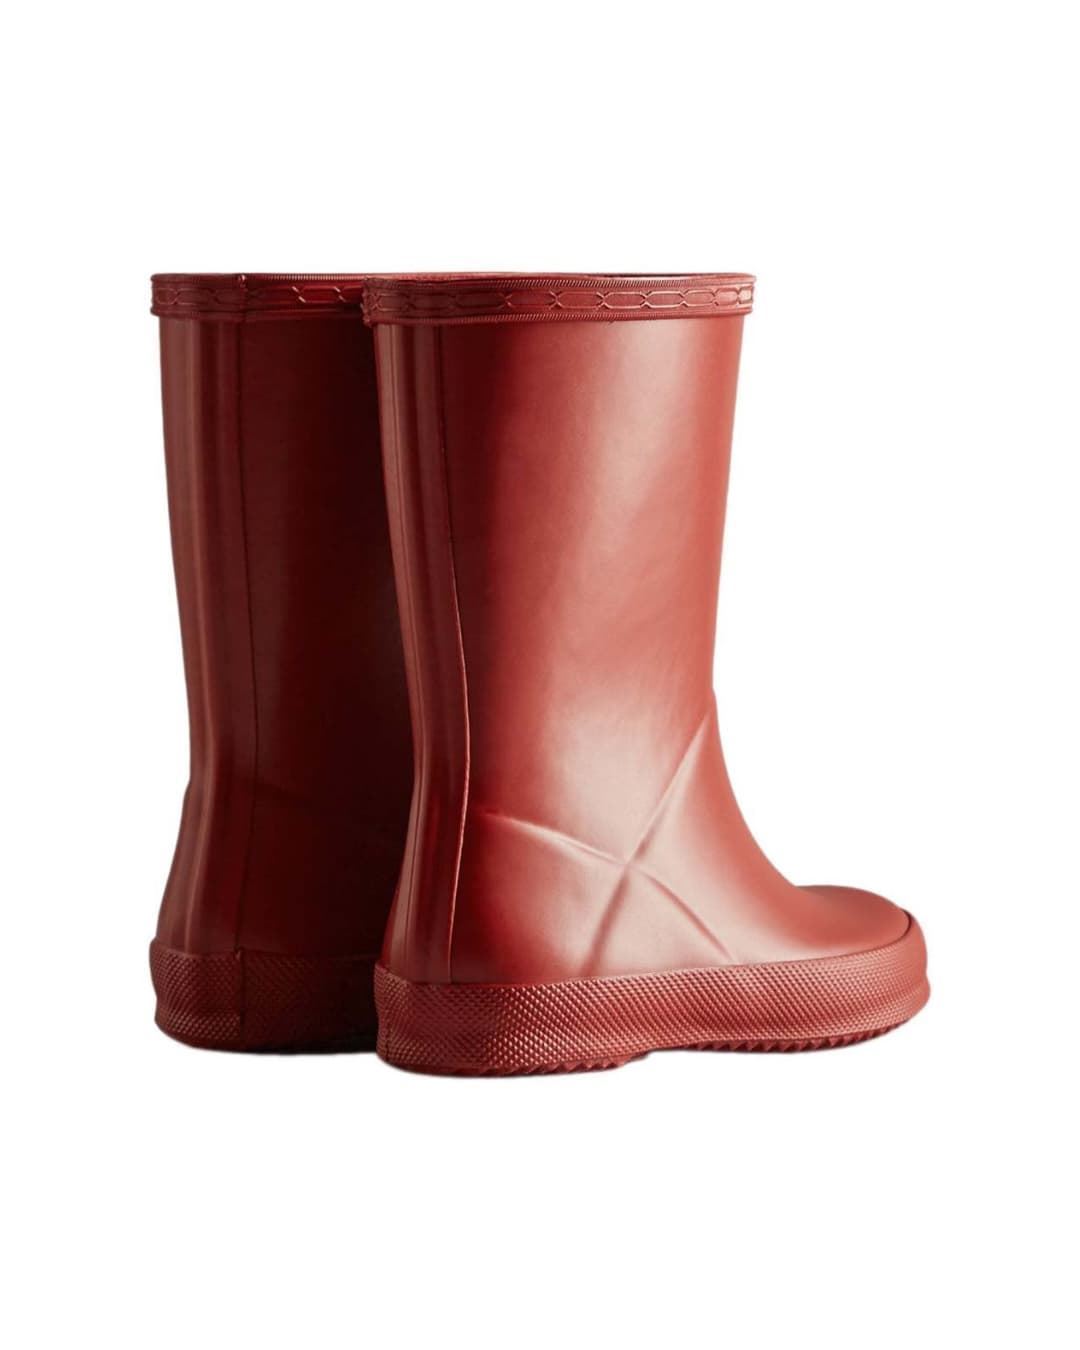 Hunter Rain Boots for Kids First Red - Image 3